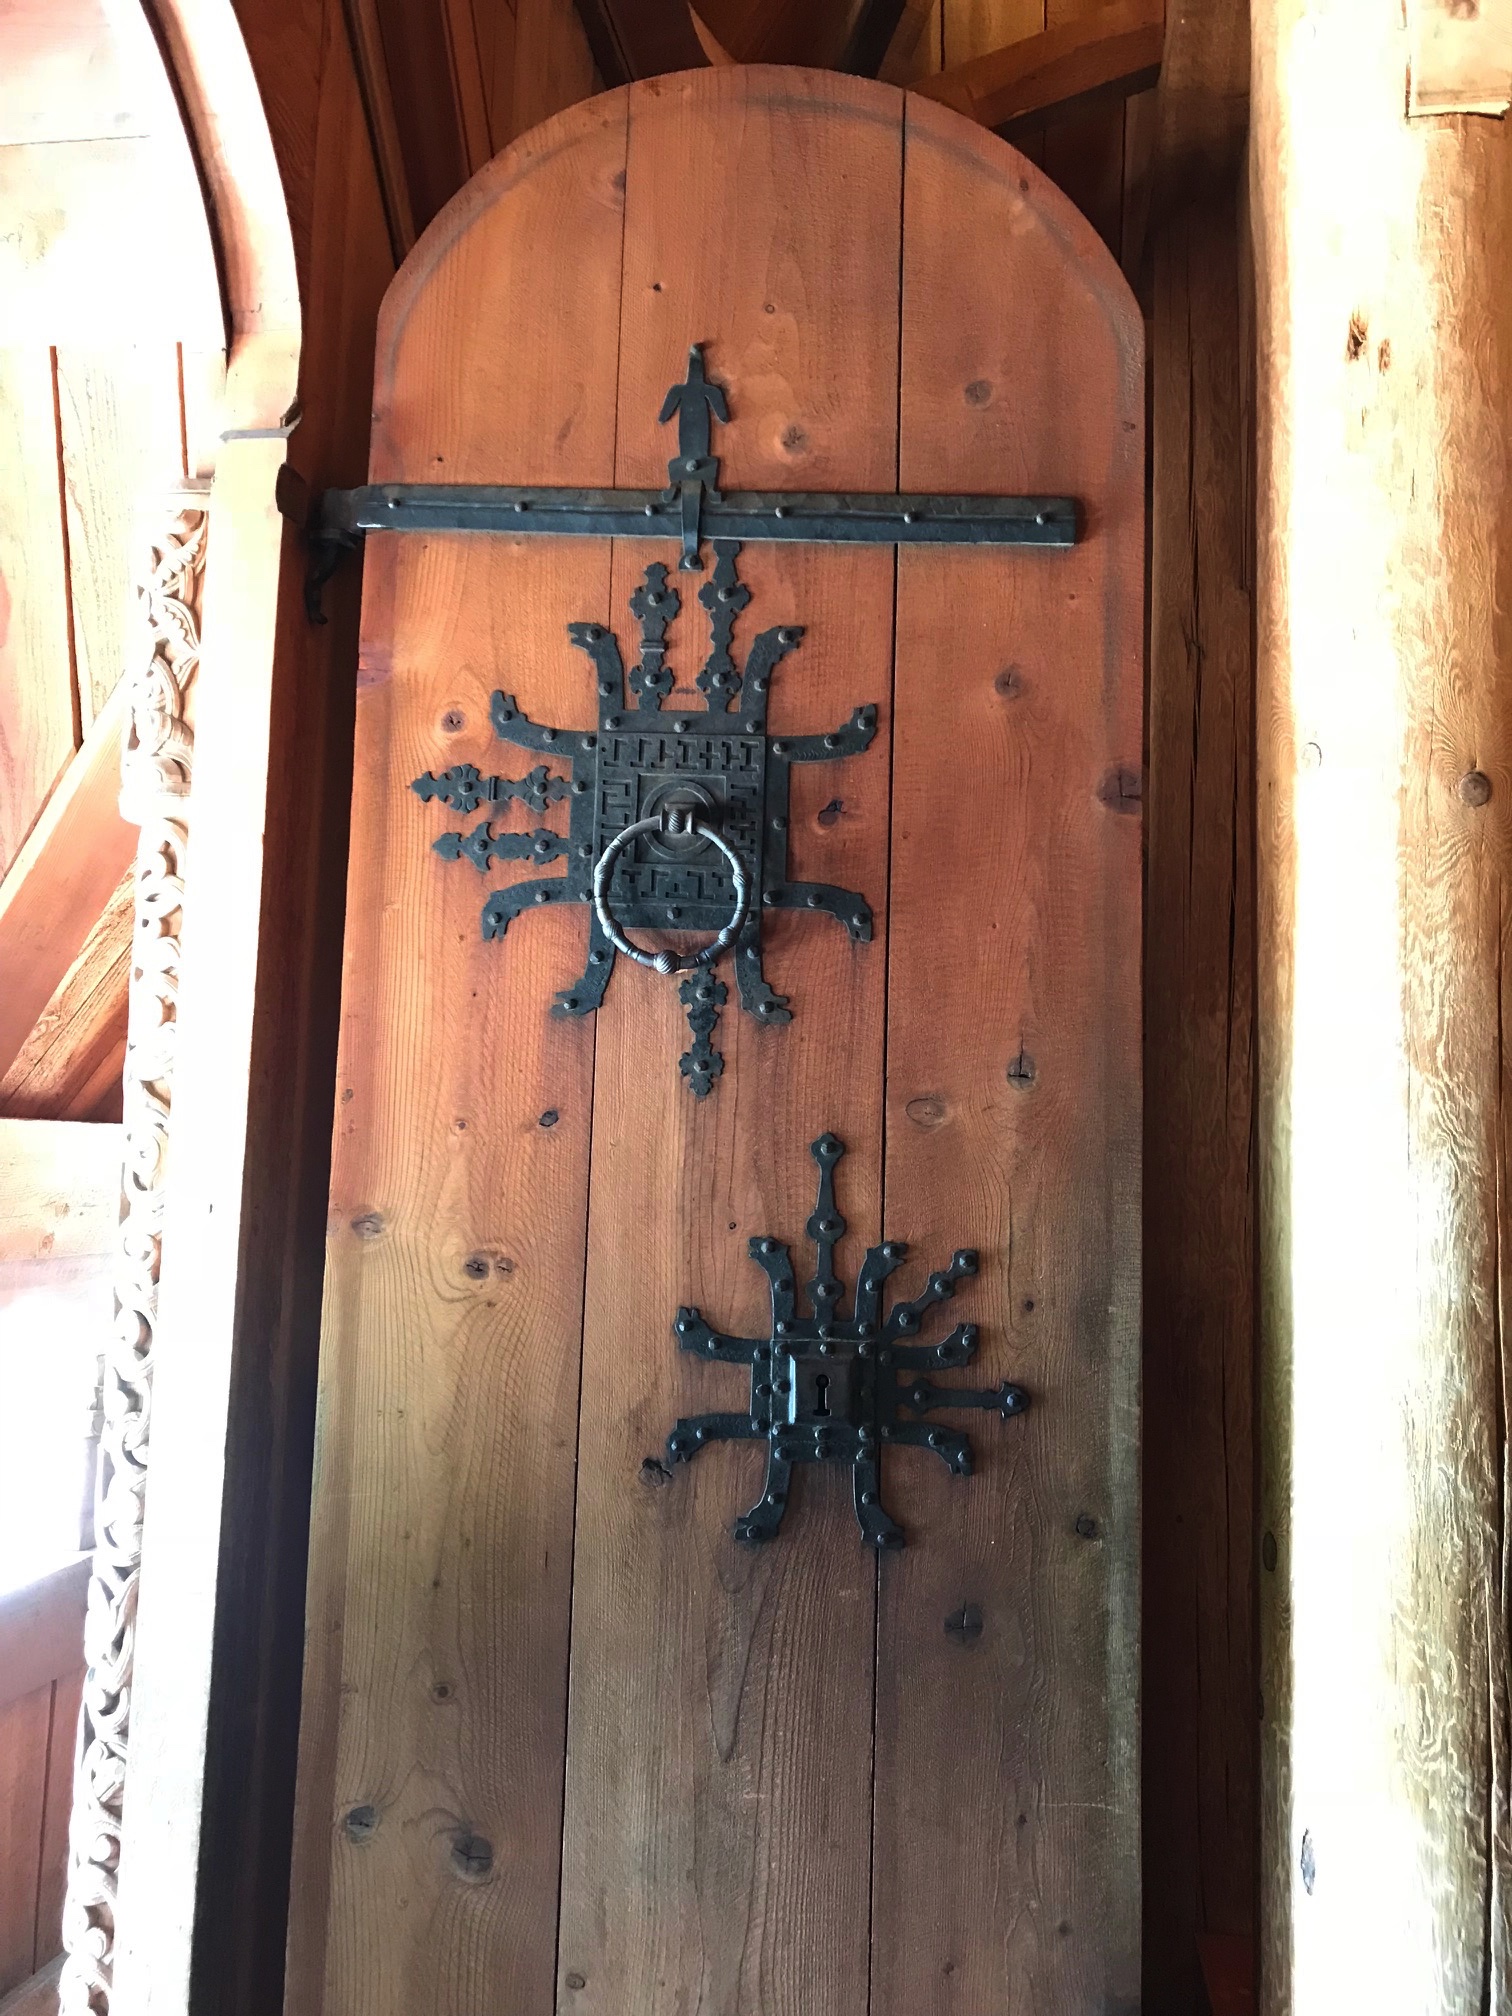 A wooden, church door with ornate, wrought iron knockers